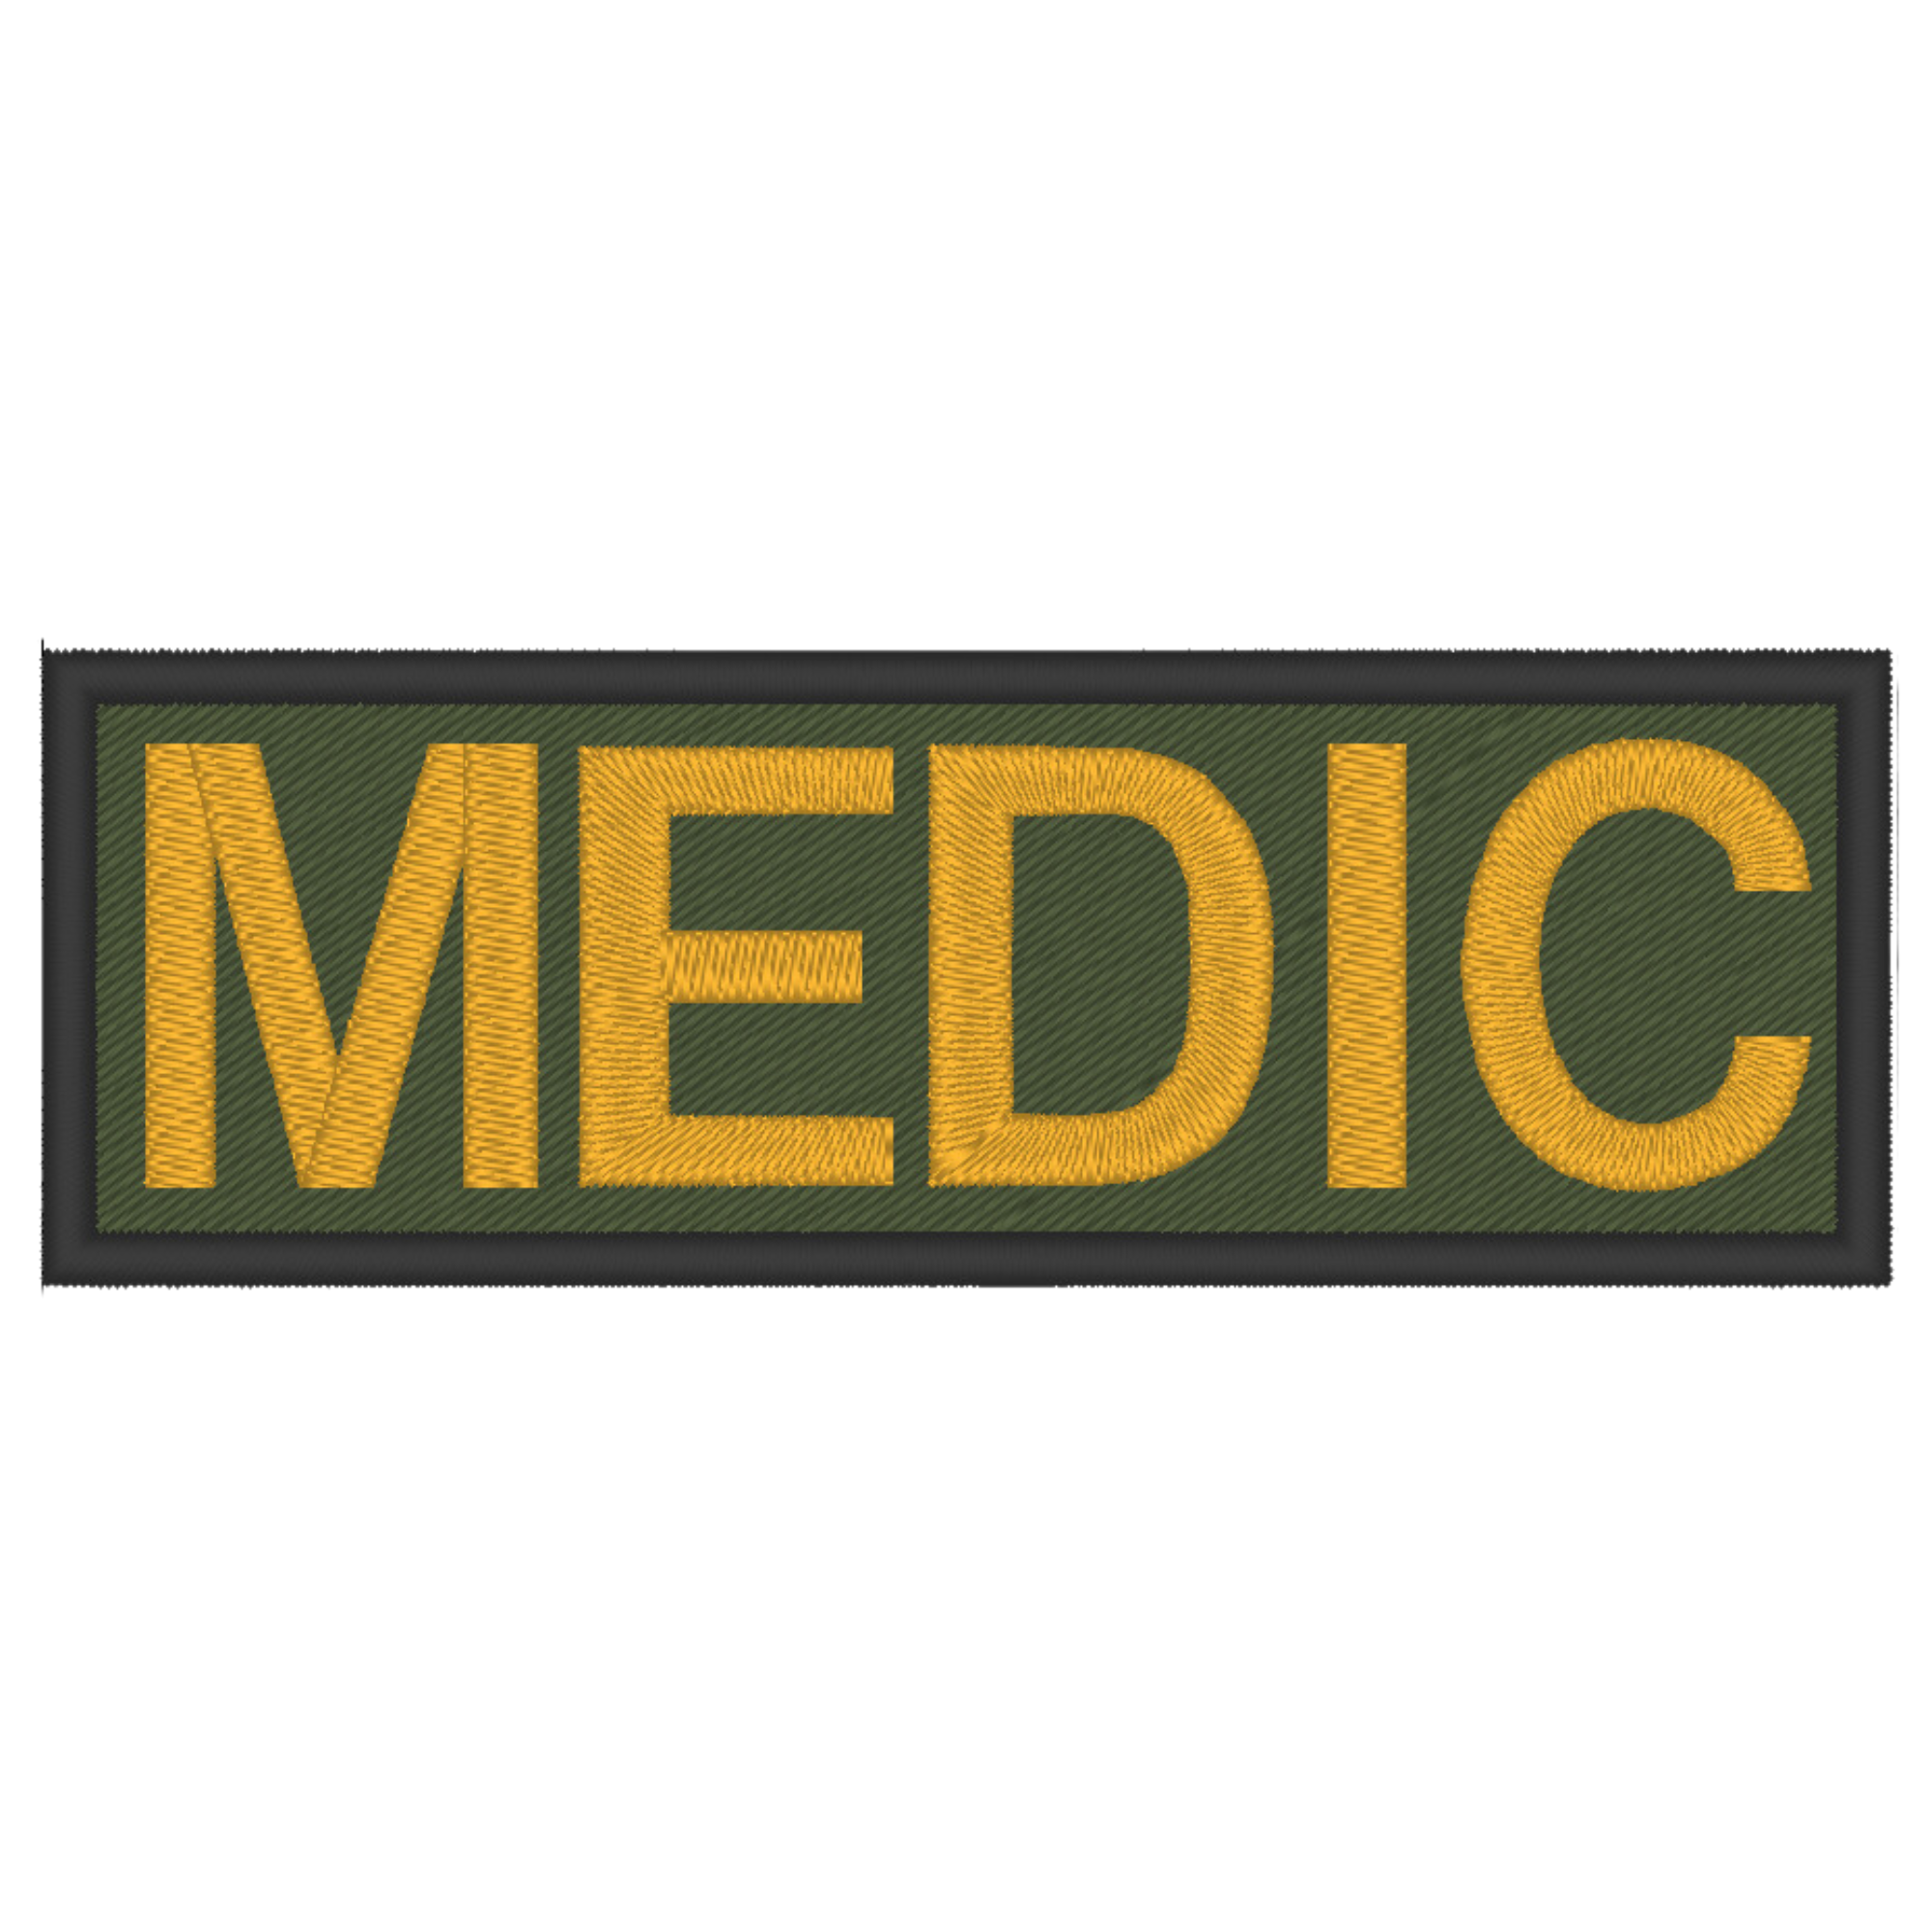 Medic Patch - Medical Cross Embroidered Patch – American Citizens Defense